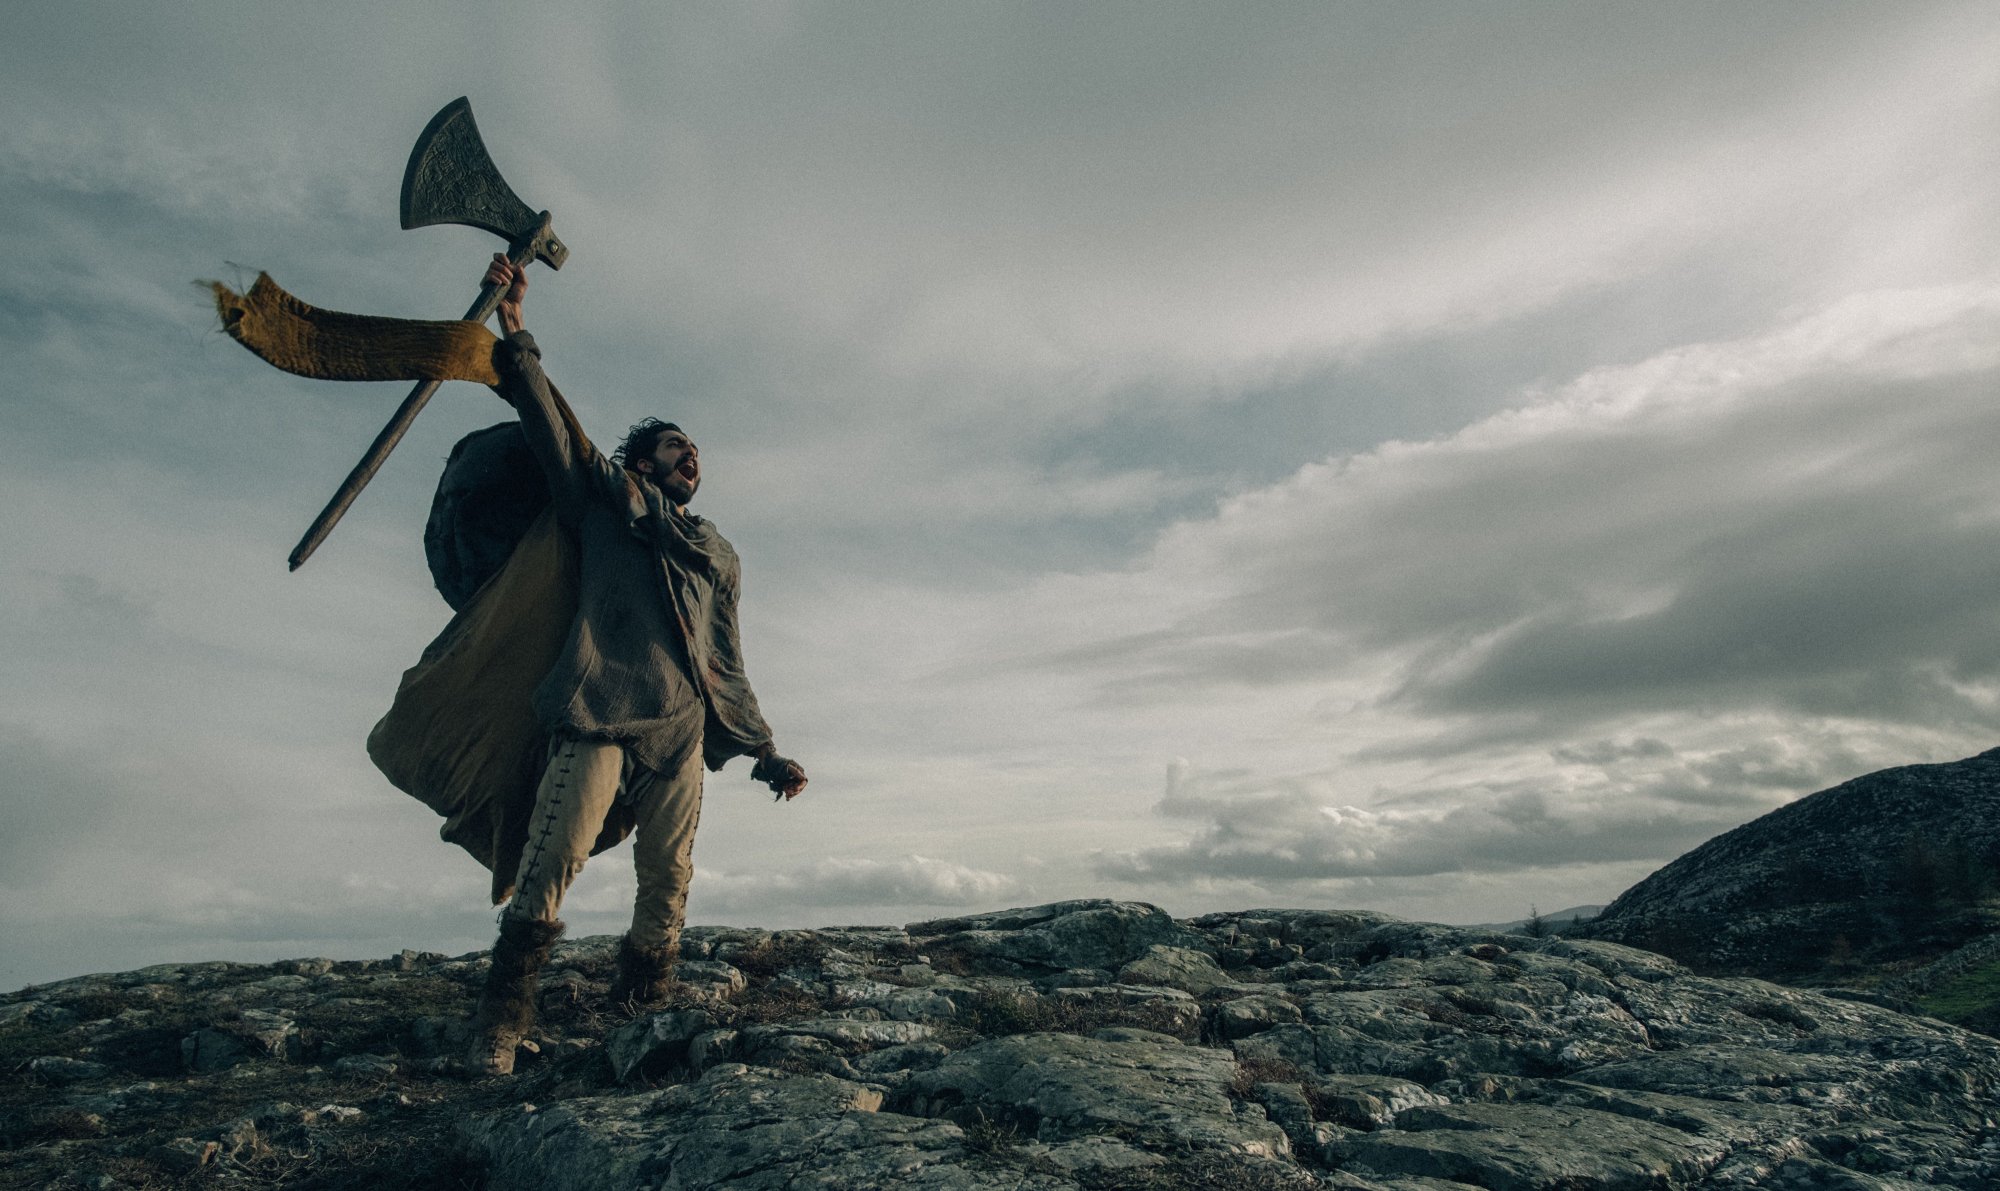 'The Green Knight' Dev Patel as Gawain holding up an axe shouting at the sky